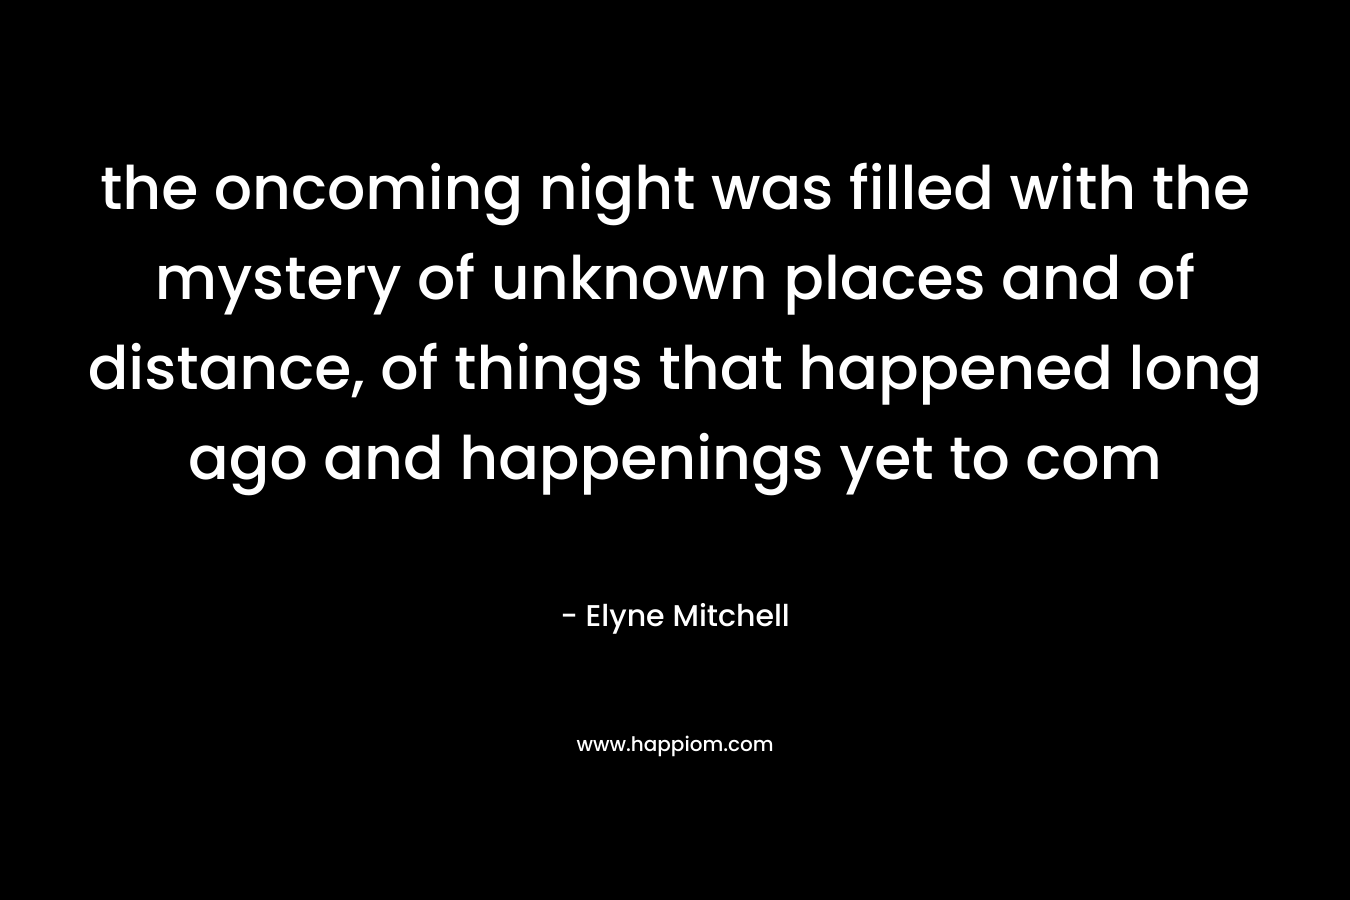 the oncoming night was filled with the mystery of unknown places and of distance, of things that happened long ago and happenings yet to com – Elyne Mitchell